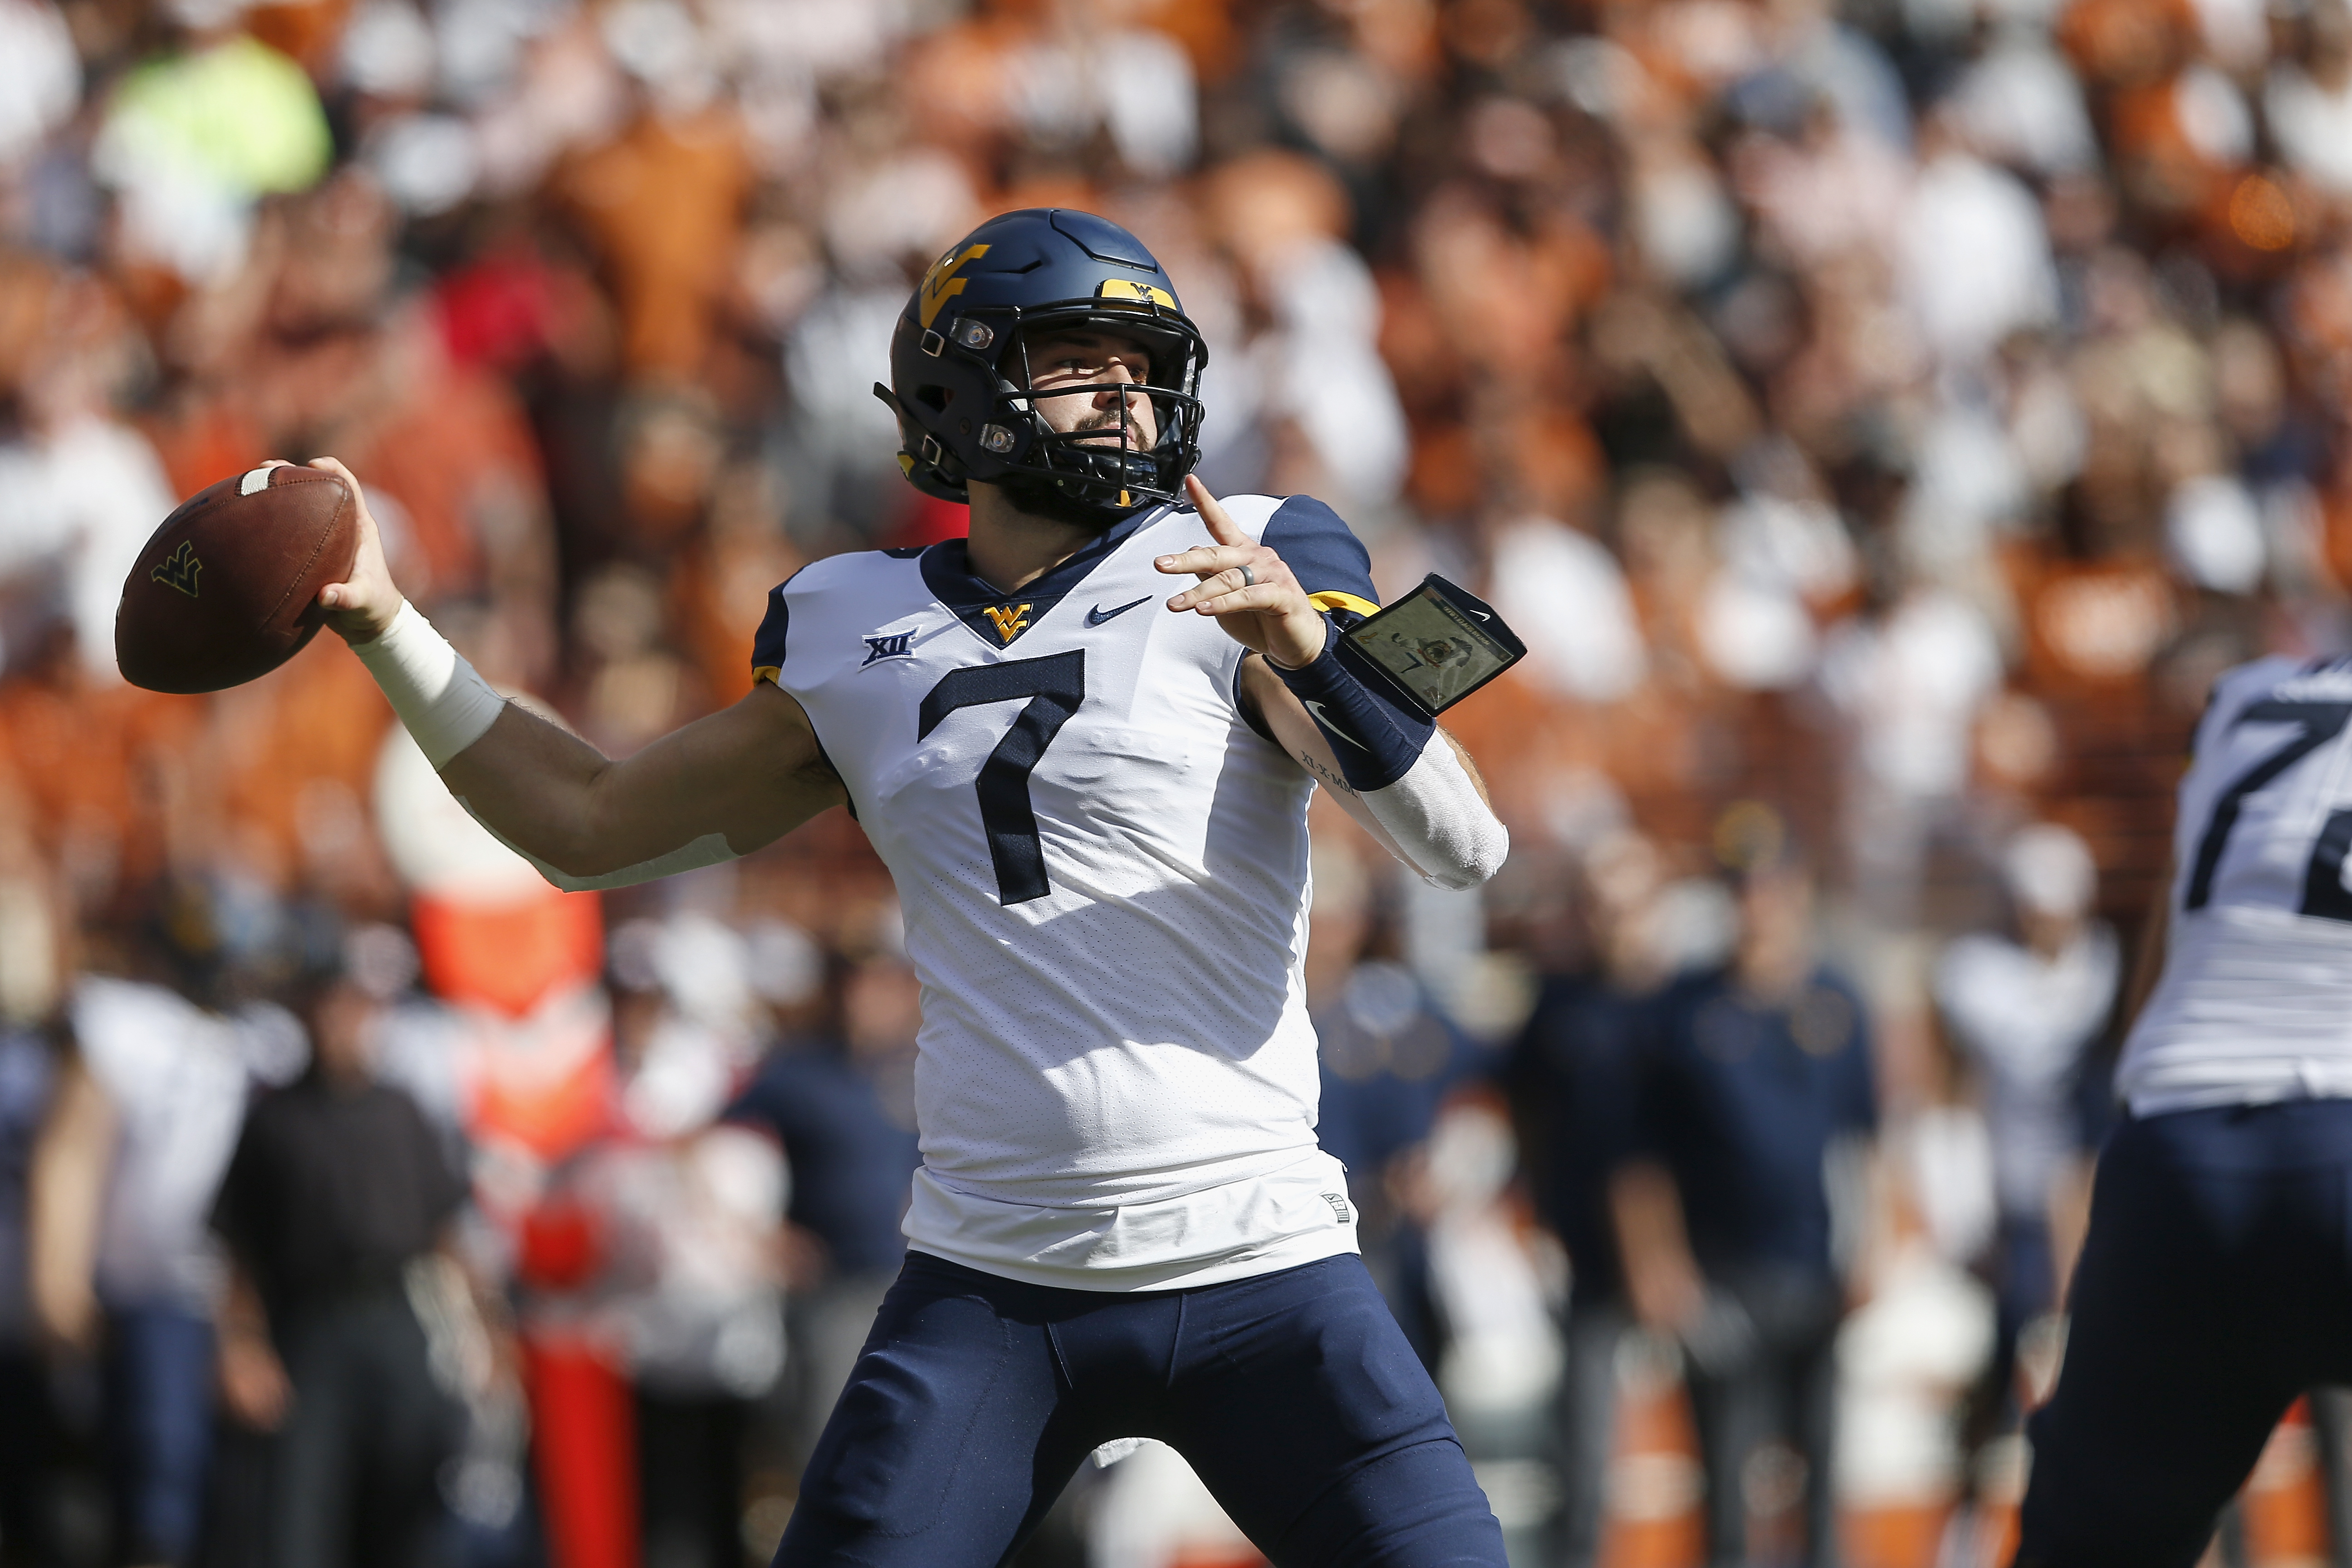 West Virginia Vs Oklahoma Top Nfl Draft Prospects To Watch